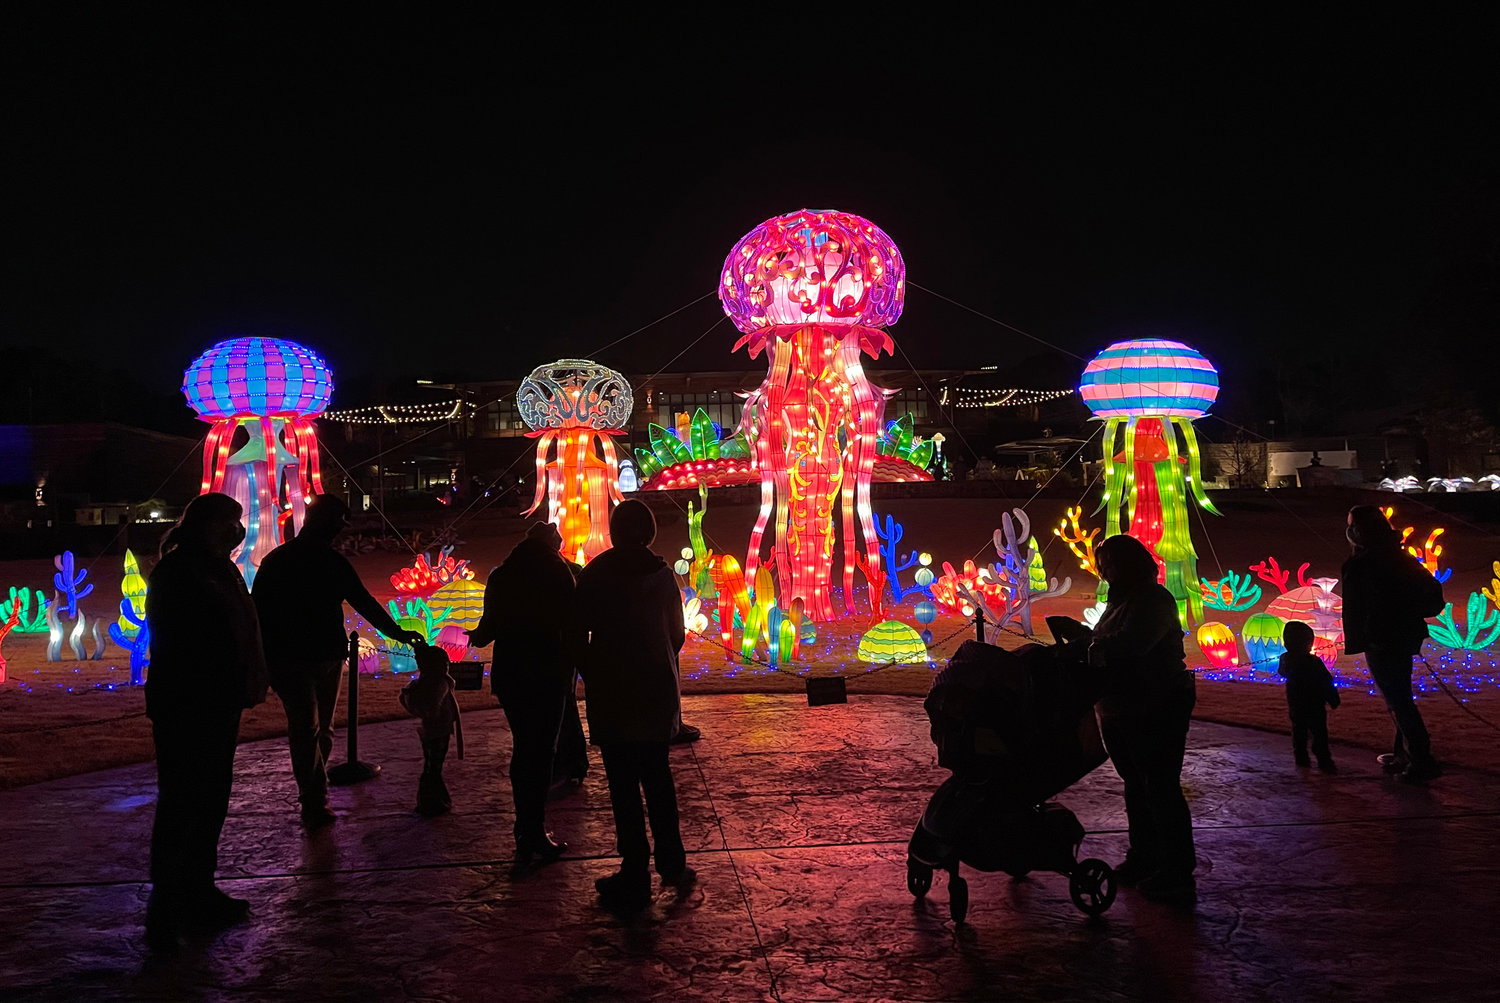 The Asian Lantern Spectacular is lit Wednesday – Sunday evenings from 6-10:30pm, Last admission is at 9:30pm